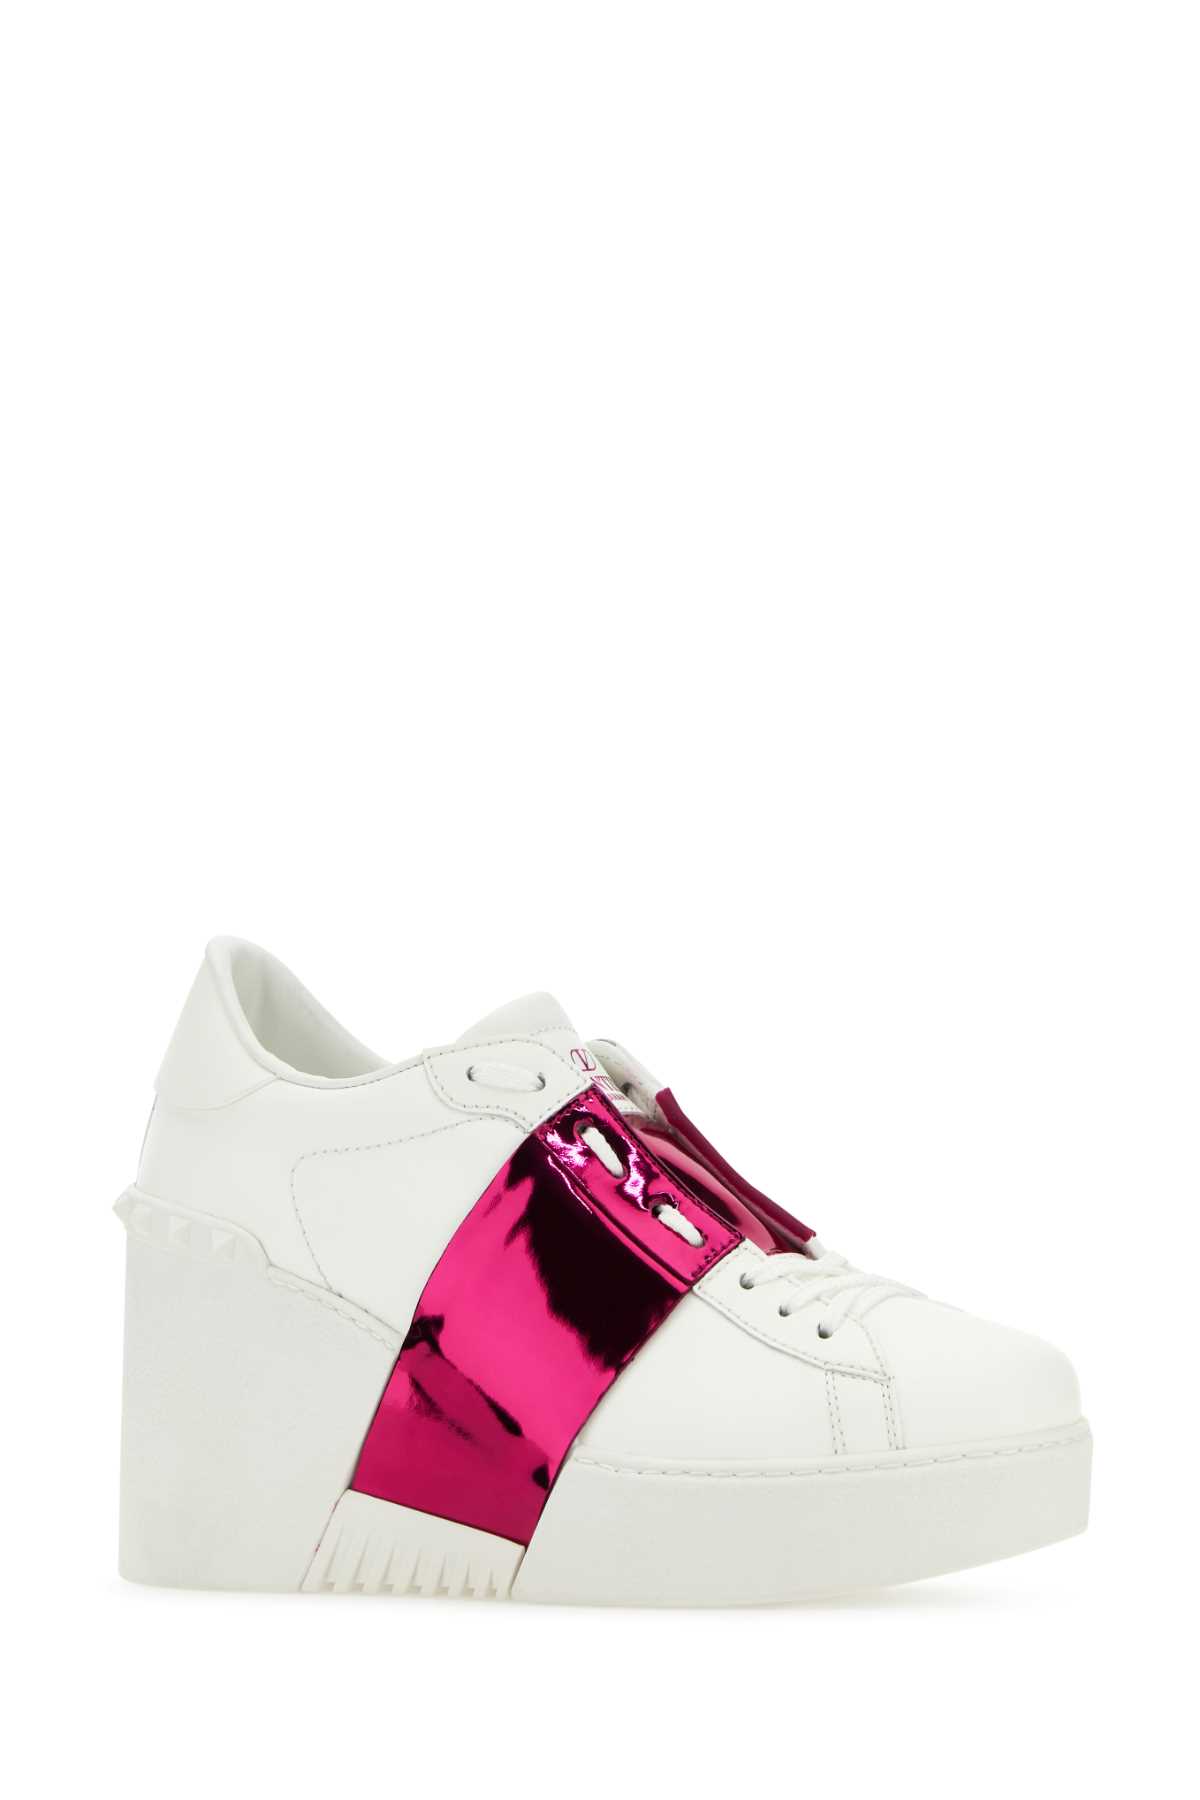 Valentino Garavani White Leather Untitled Sneakers With Fuchsia Band In Biaboubia